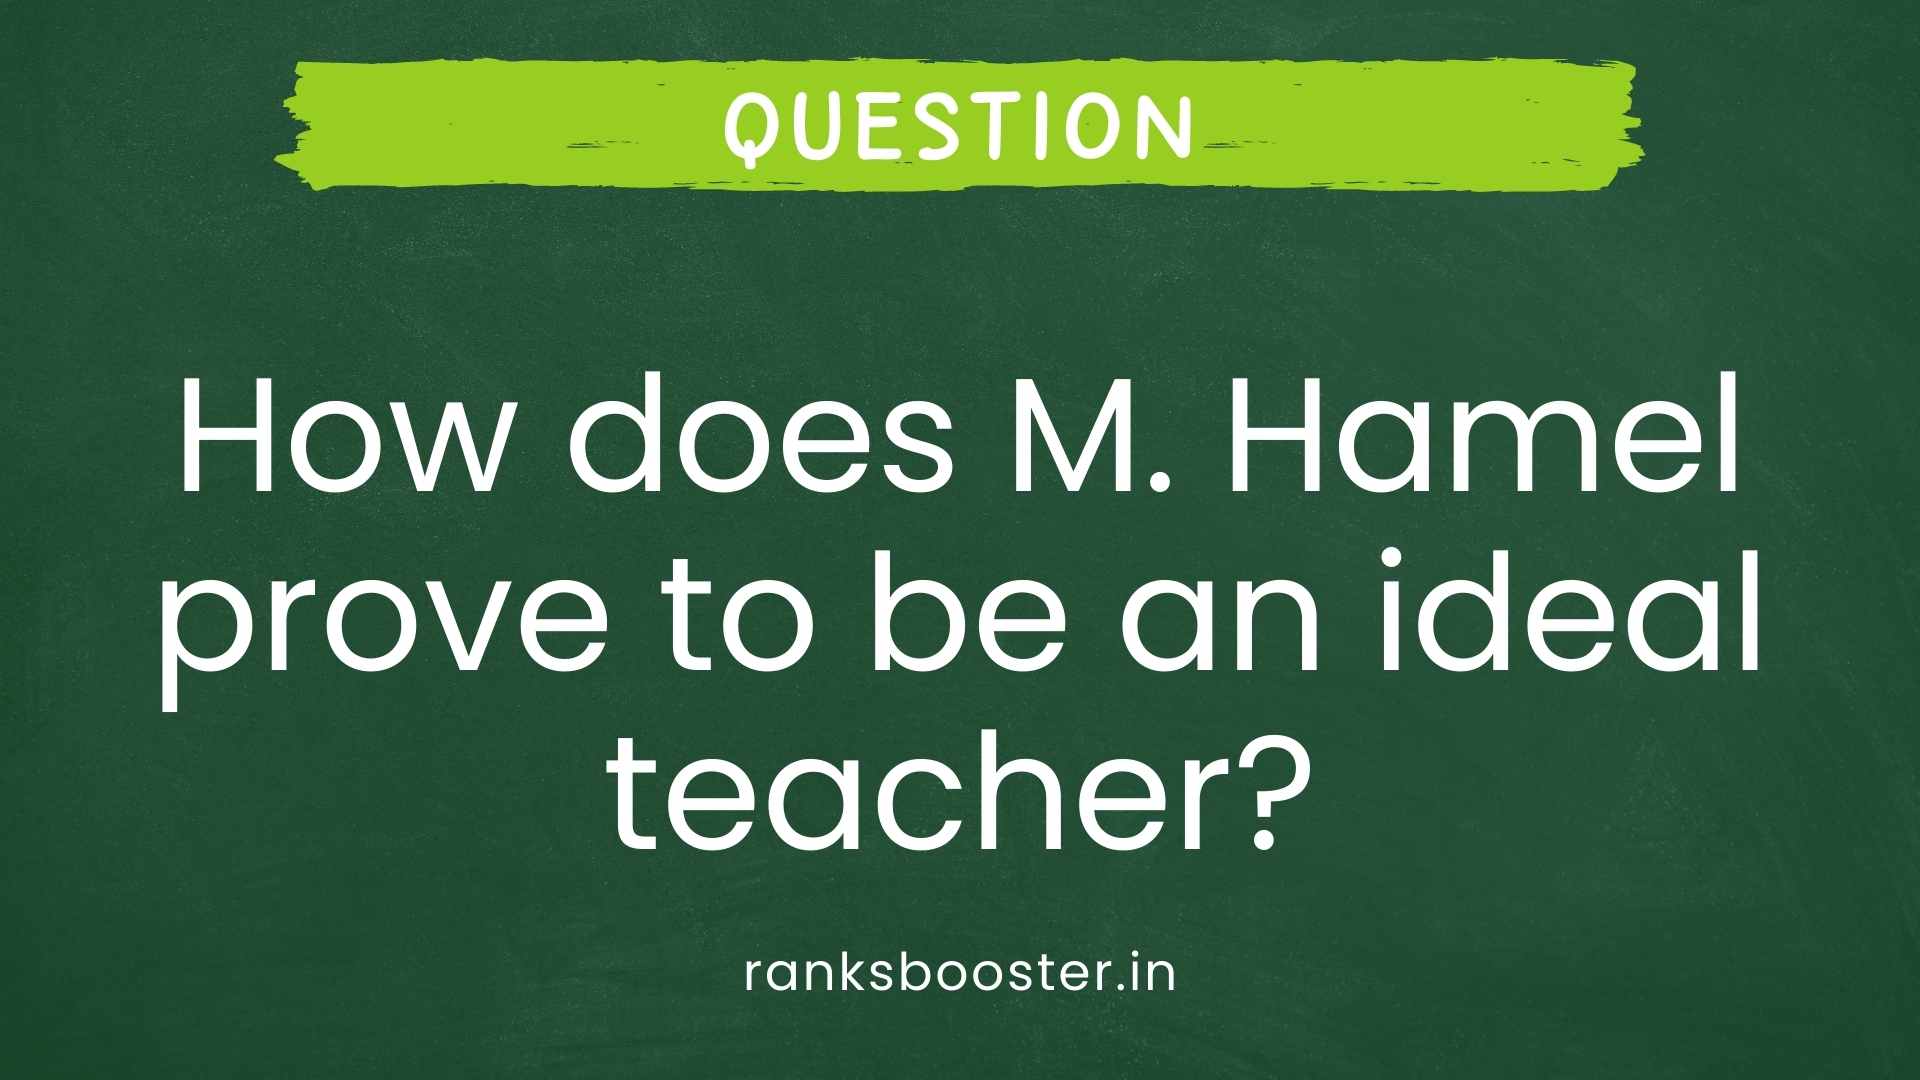 Question: How does M. Hamel prove to be an ideal teacher?